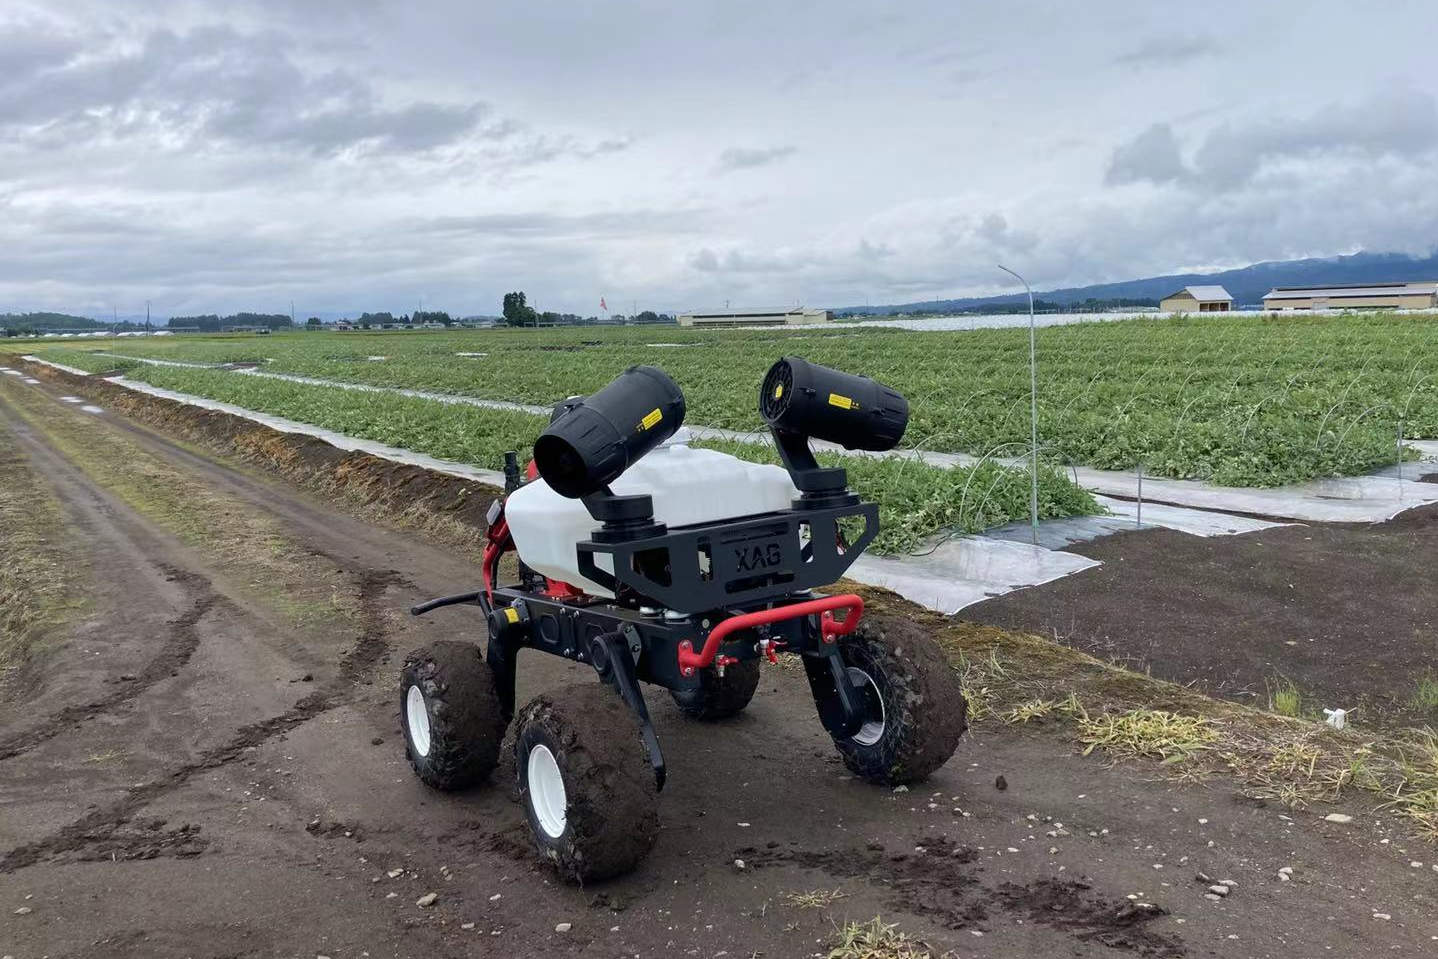 R150 carried to the watermelon field